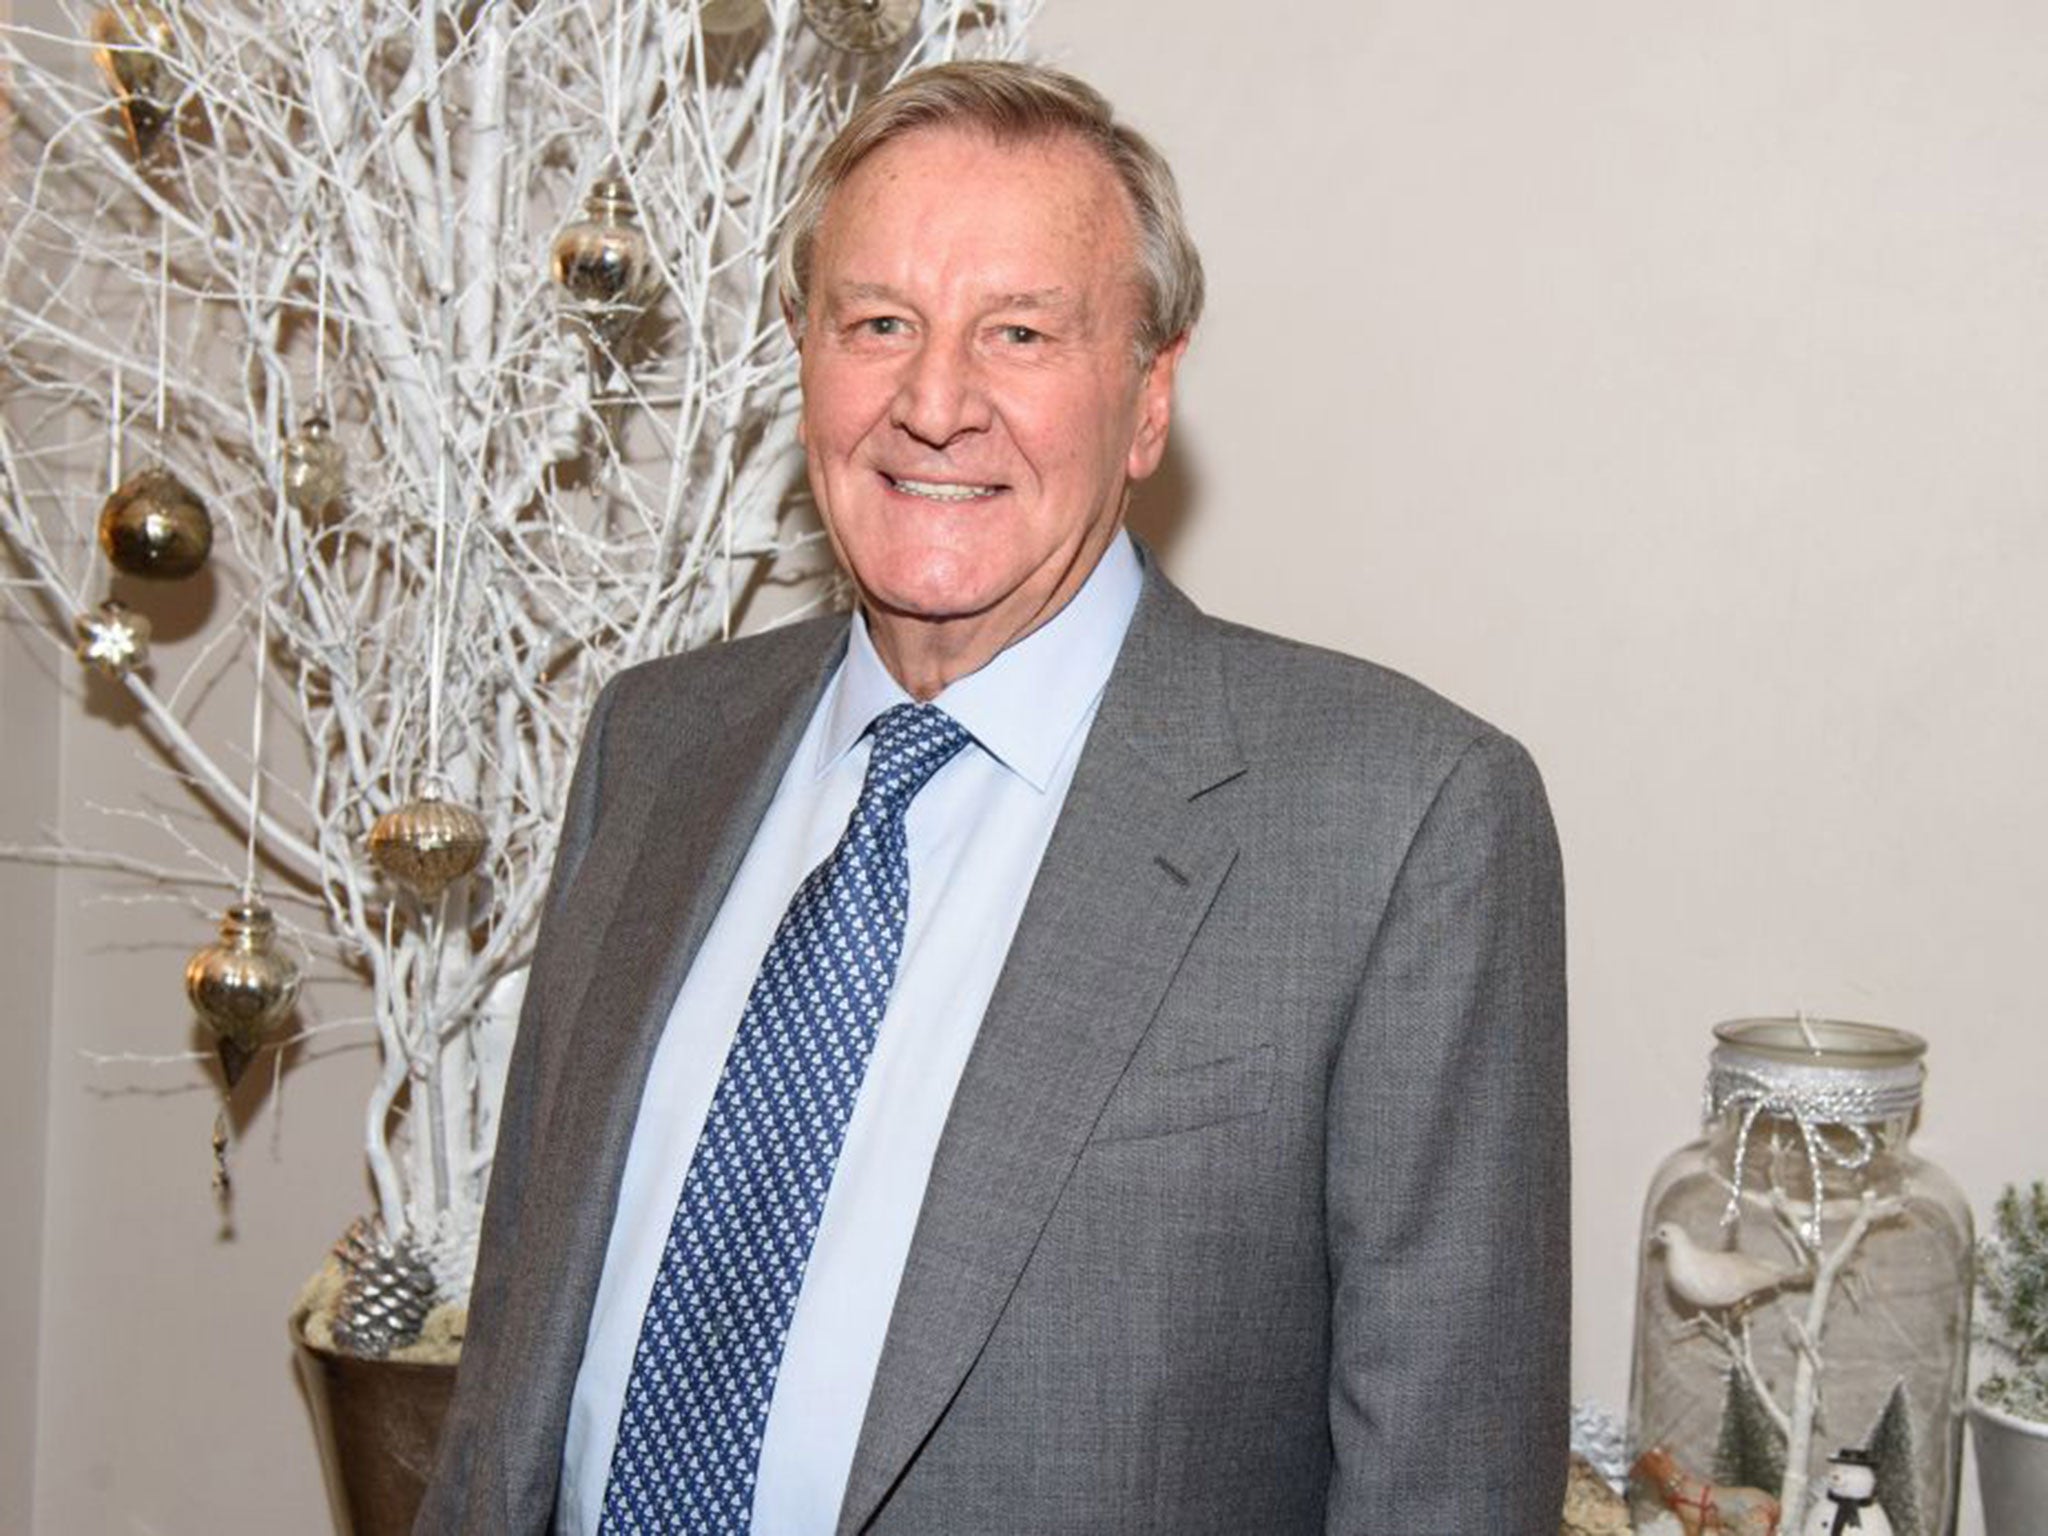 Mike Gooley CBE, Founder & Chairman of Trailfinders